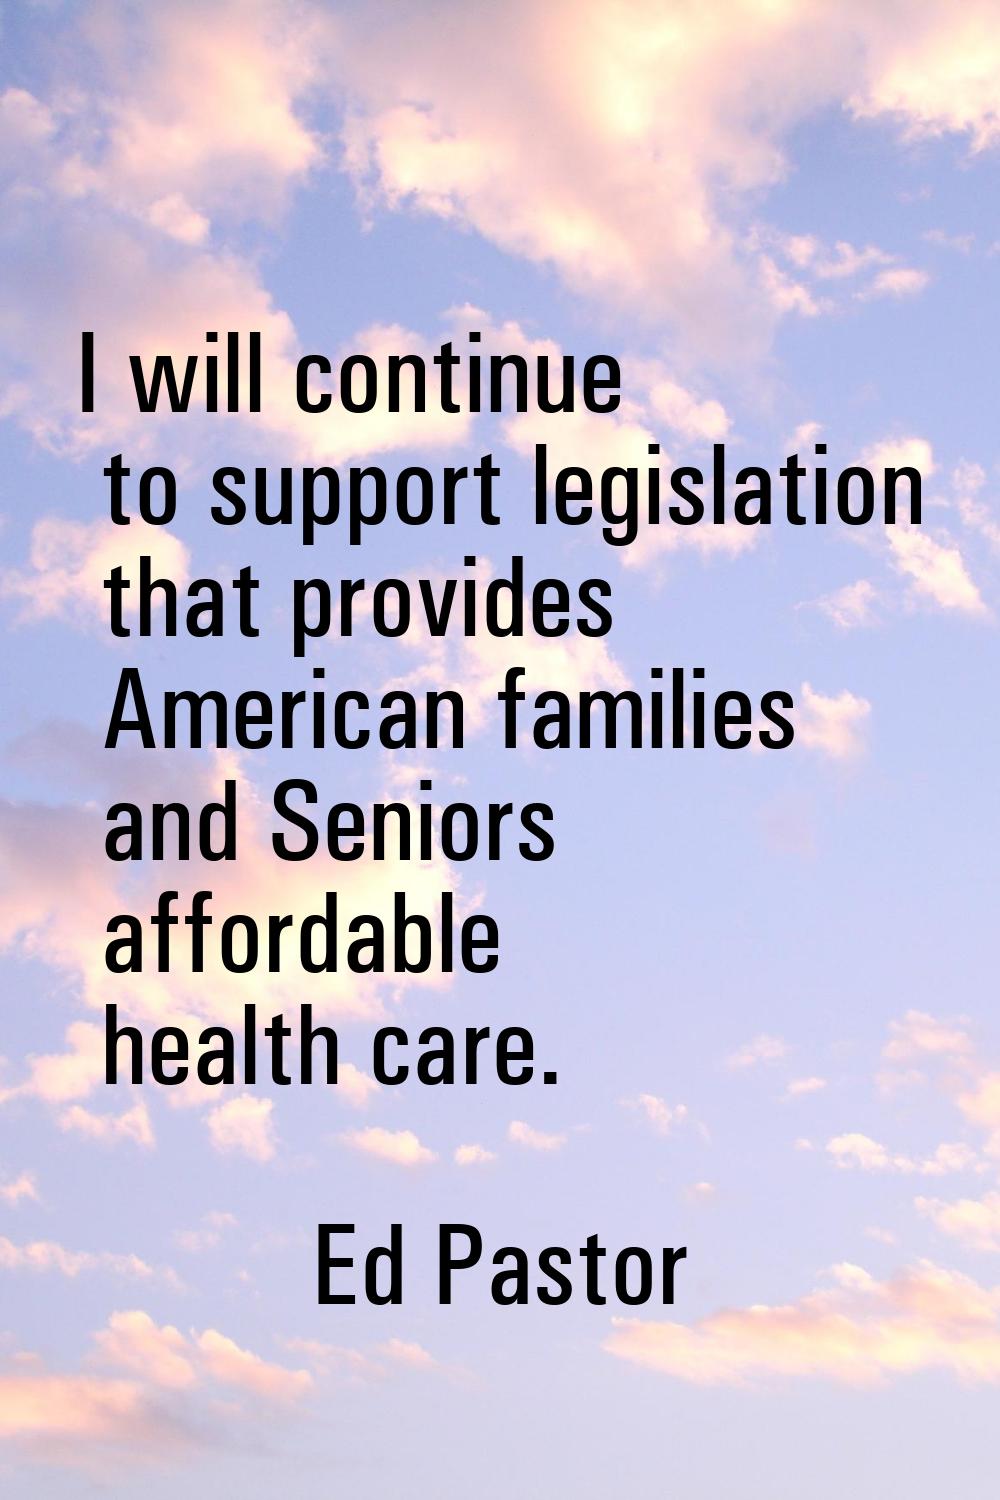 I will continue to support legislation that provides American families and Seniors affordable healt